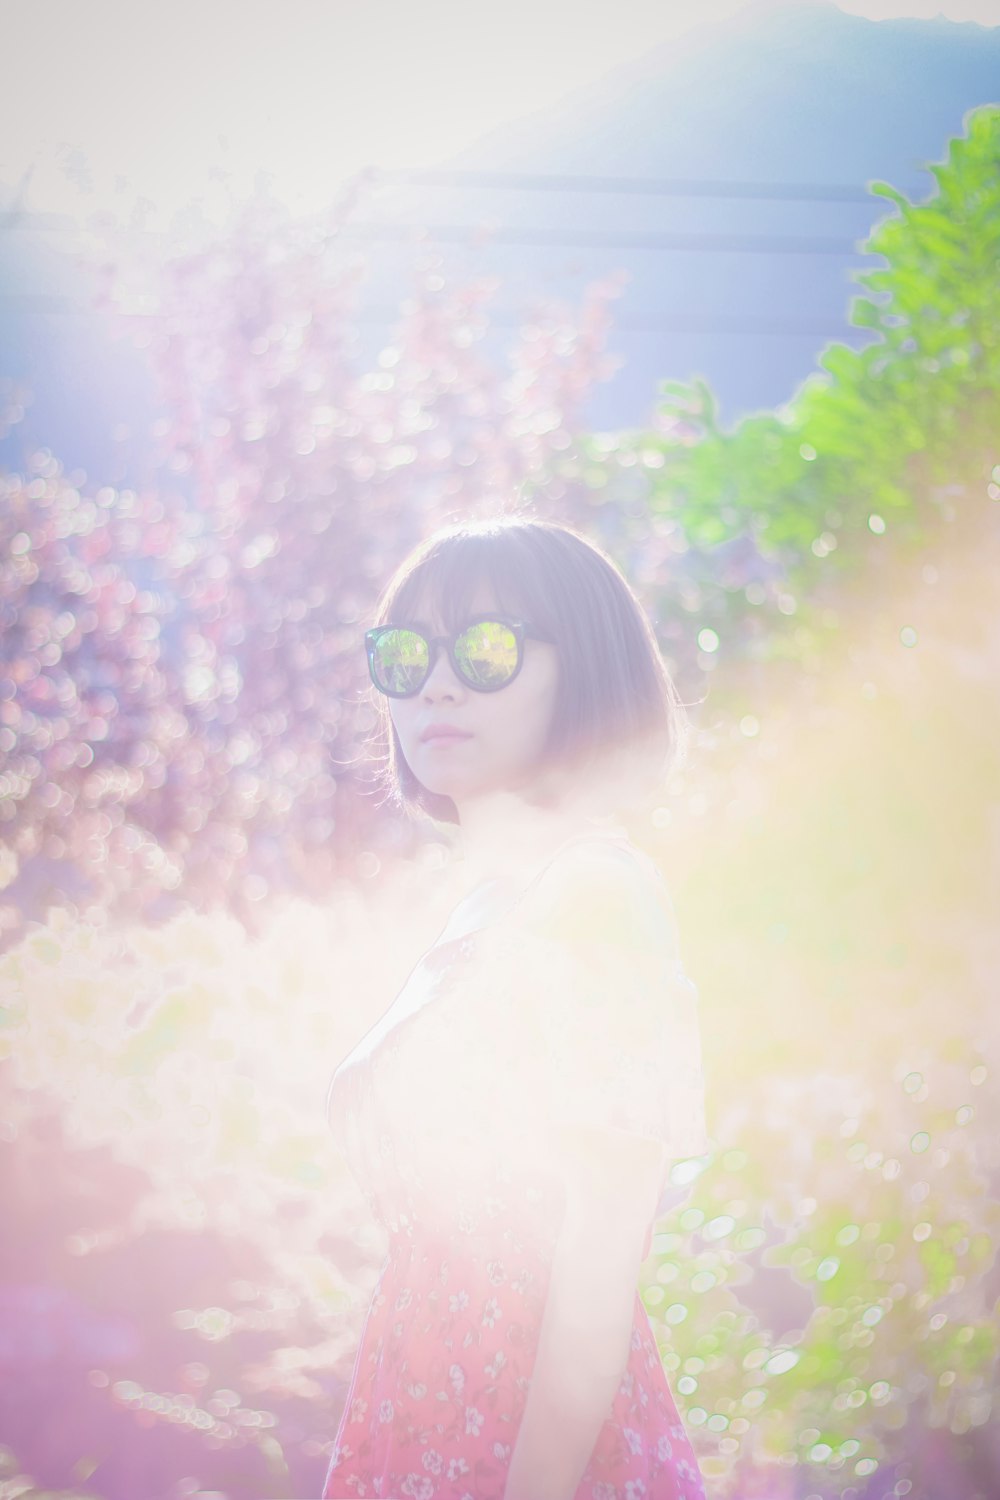 woman wearing sunglasses while standing near trees